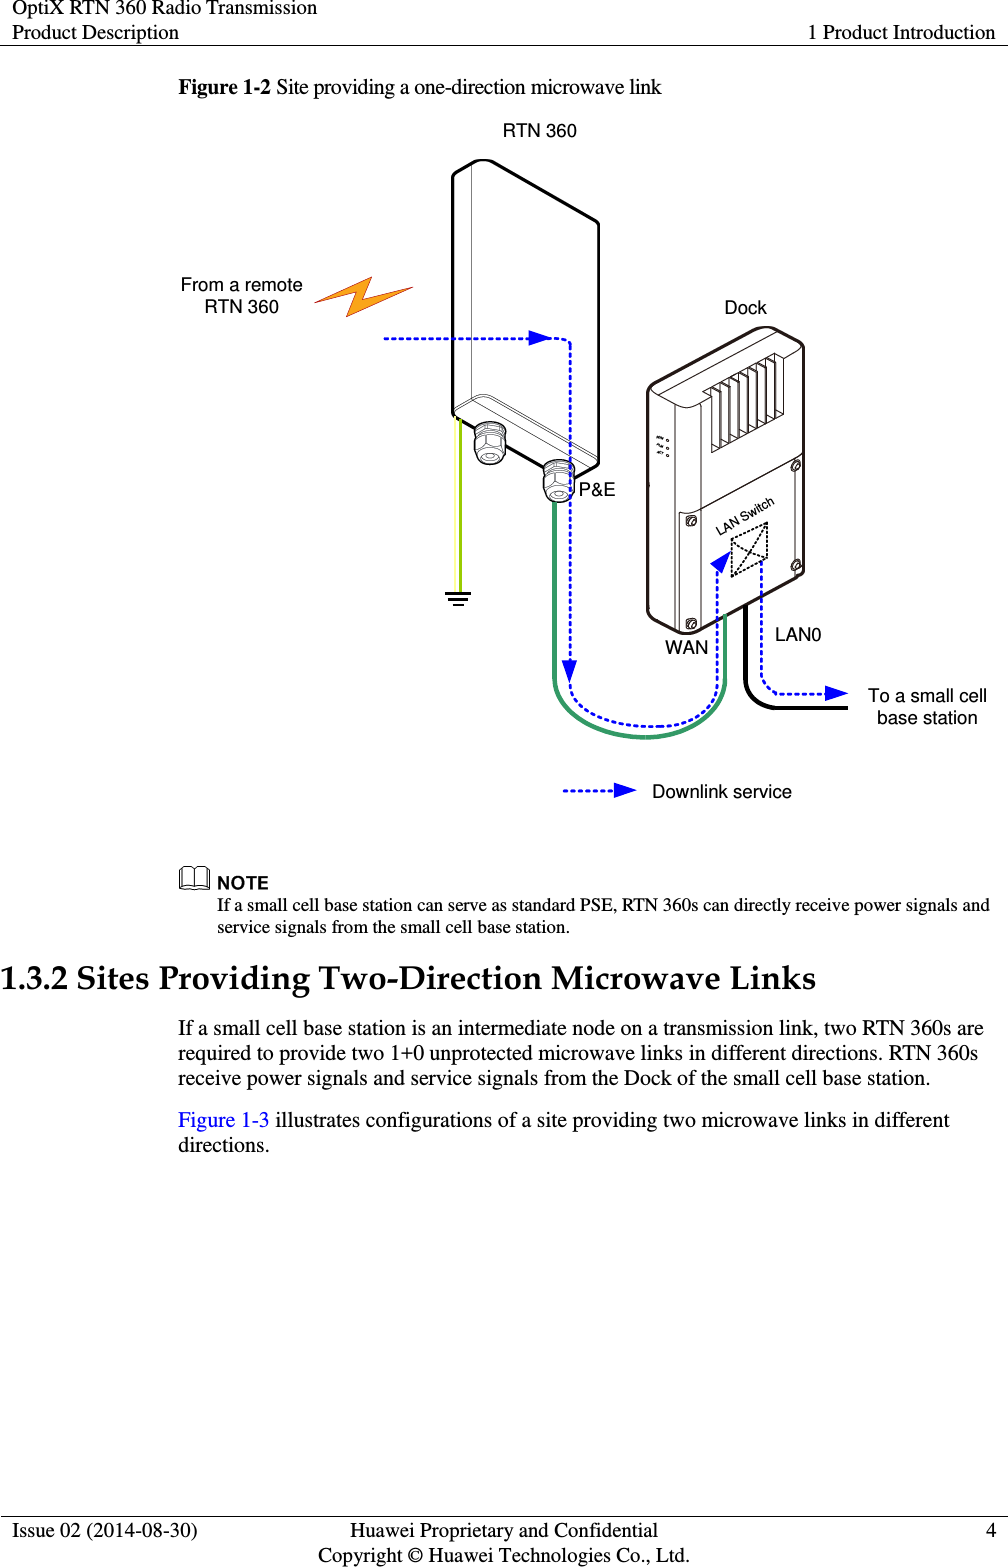 OptiX RTN 360 Radio Transmission Product Description 1 Product Introduction  Issue 02 (2014-08-30) Huawei Proprietary and Confidential                                     Copyright © Huawei Technologies Co., Ltd. 4  Figure 1-2 Site providing a one-direction microwave link WAN LAN0To a small cell base stationP&amp;ERTN 360DockDownlink serviceFrom a remote RTN 360LAN Switch   If a small cell base station can serve as standard PSE, RTN 360s can directly receive power signals and service signals from the small cell base station. 1.3.2 Sites Providing Two-Direction Microwave Links If a small cell base station is an intermediate node on a transmission link, two RTN 360s are required to provide two 1+0 unprotected microwave links in different directions. RTN 360s receive power signals and service signals from the Dock of the small cell base station. Figure 1-3 illustrates configurations of a site providing two microwave links in different directions. 